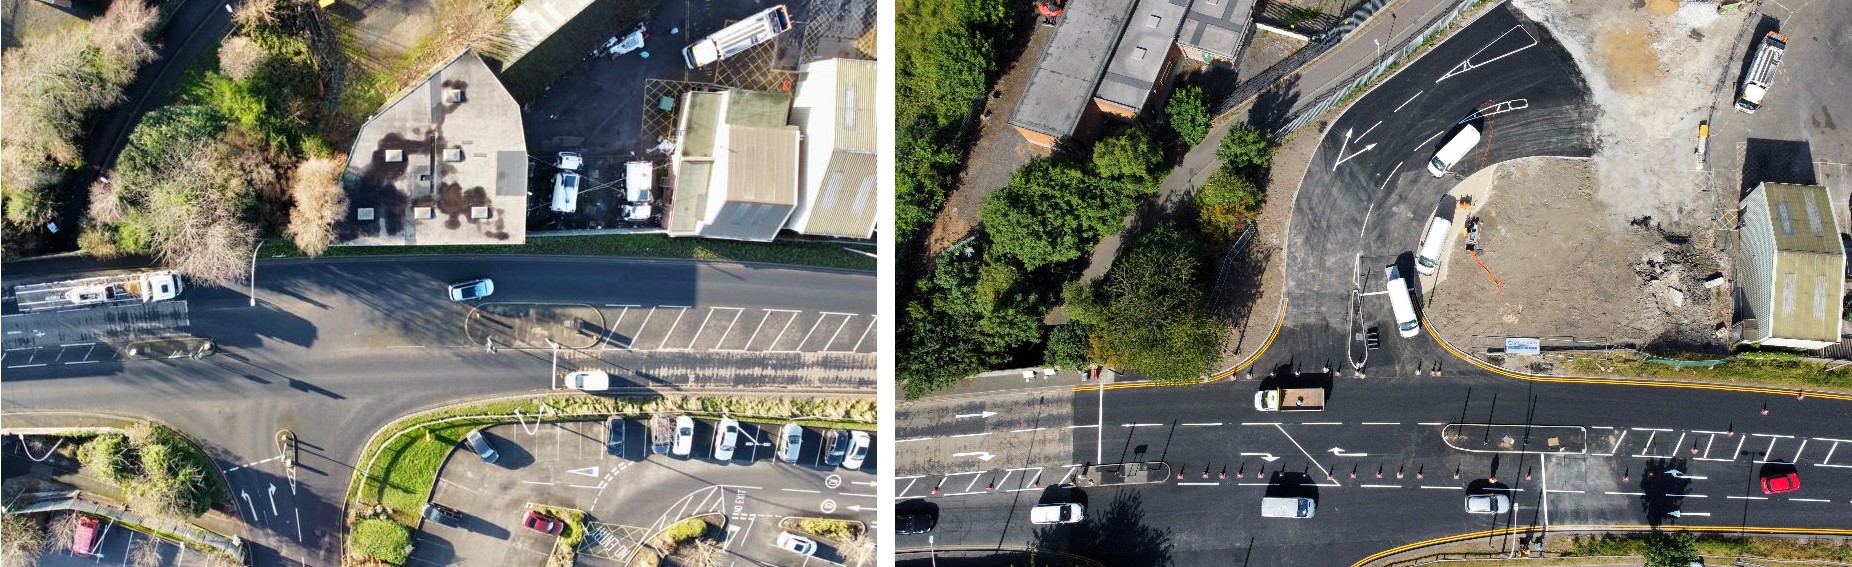 Doughty Depot Peaks Parkway before and after January May 2022